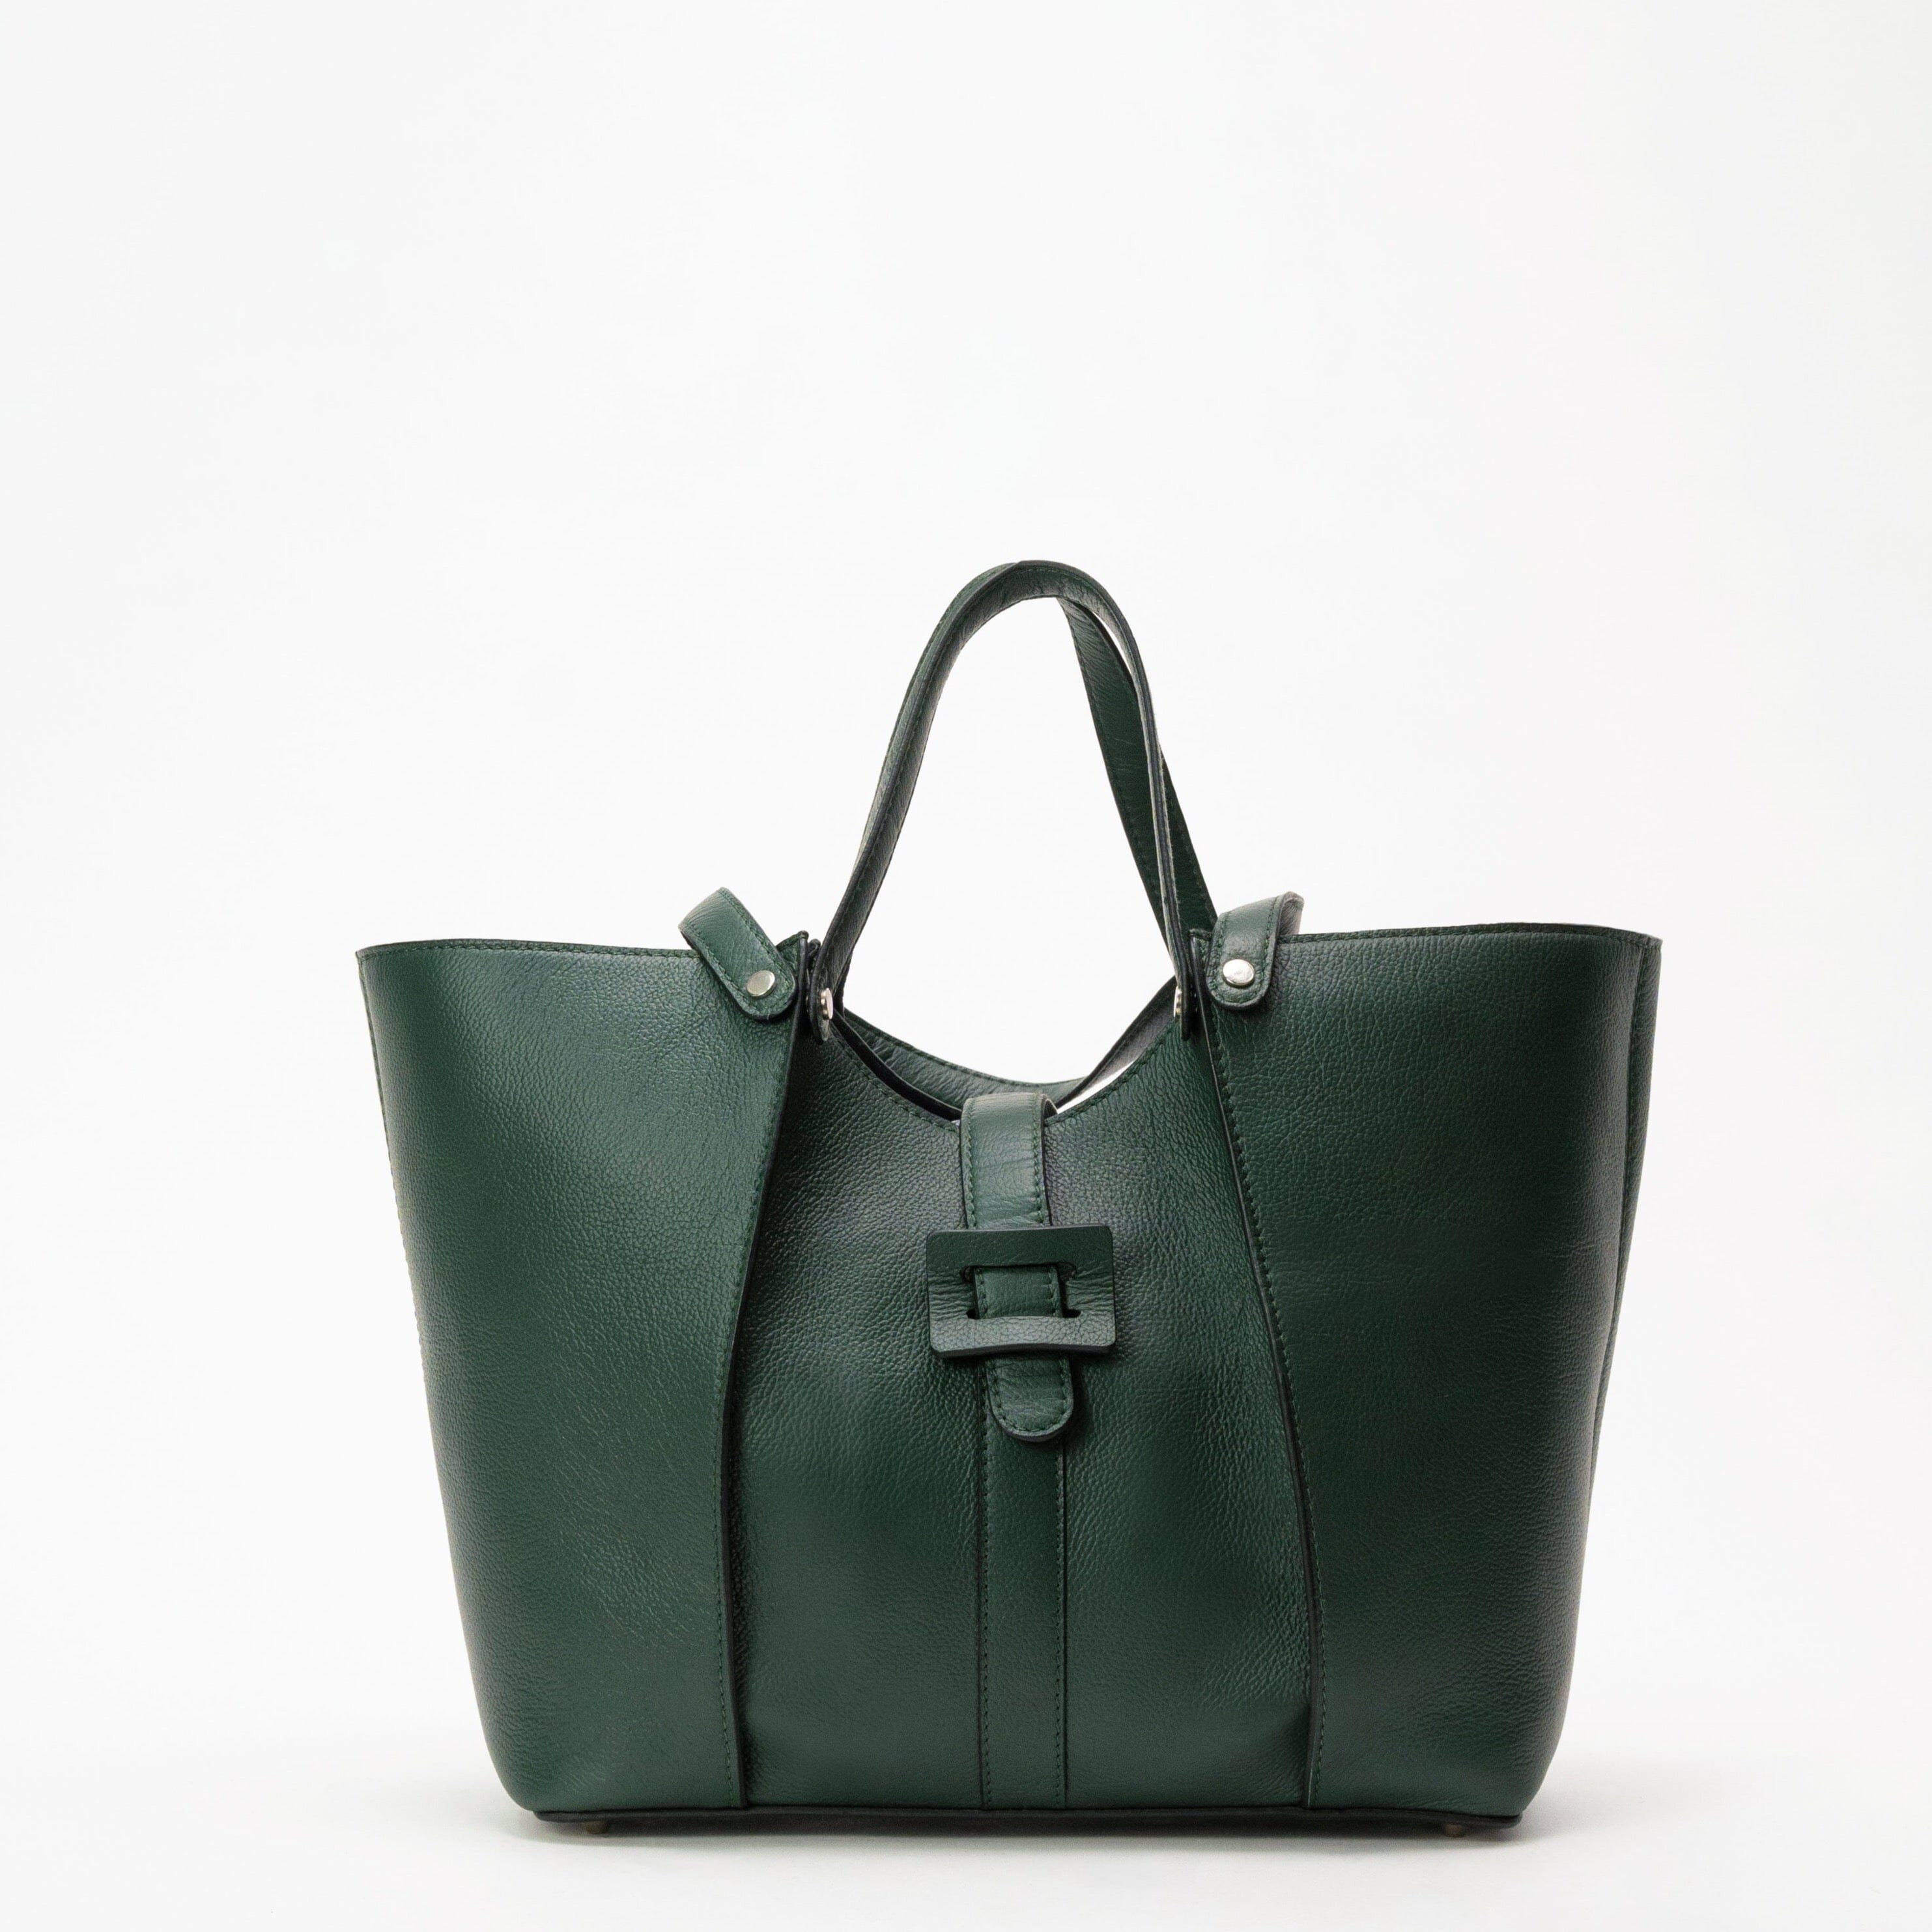 Madison Tote in Jade